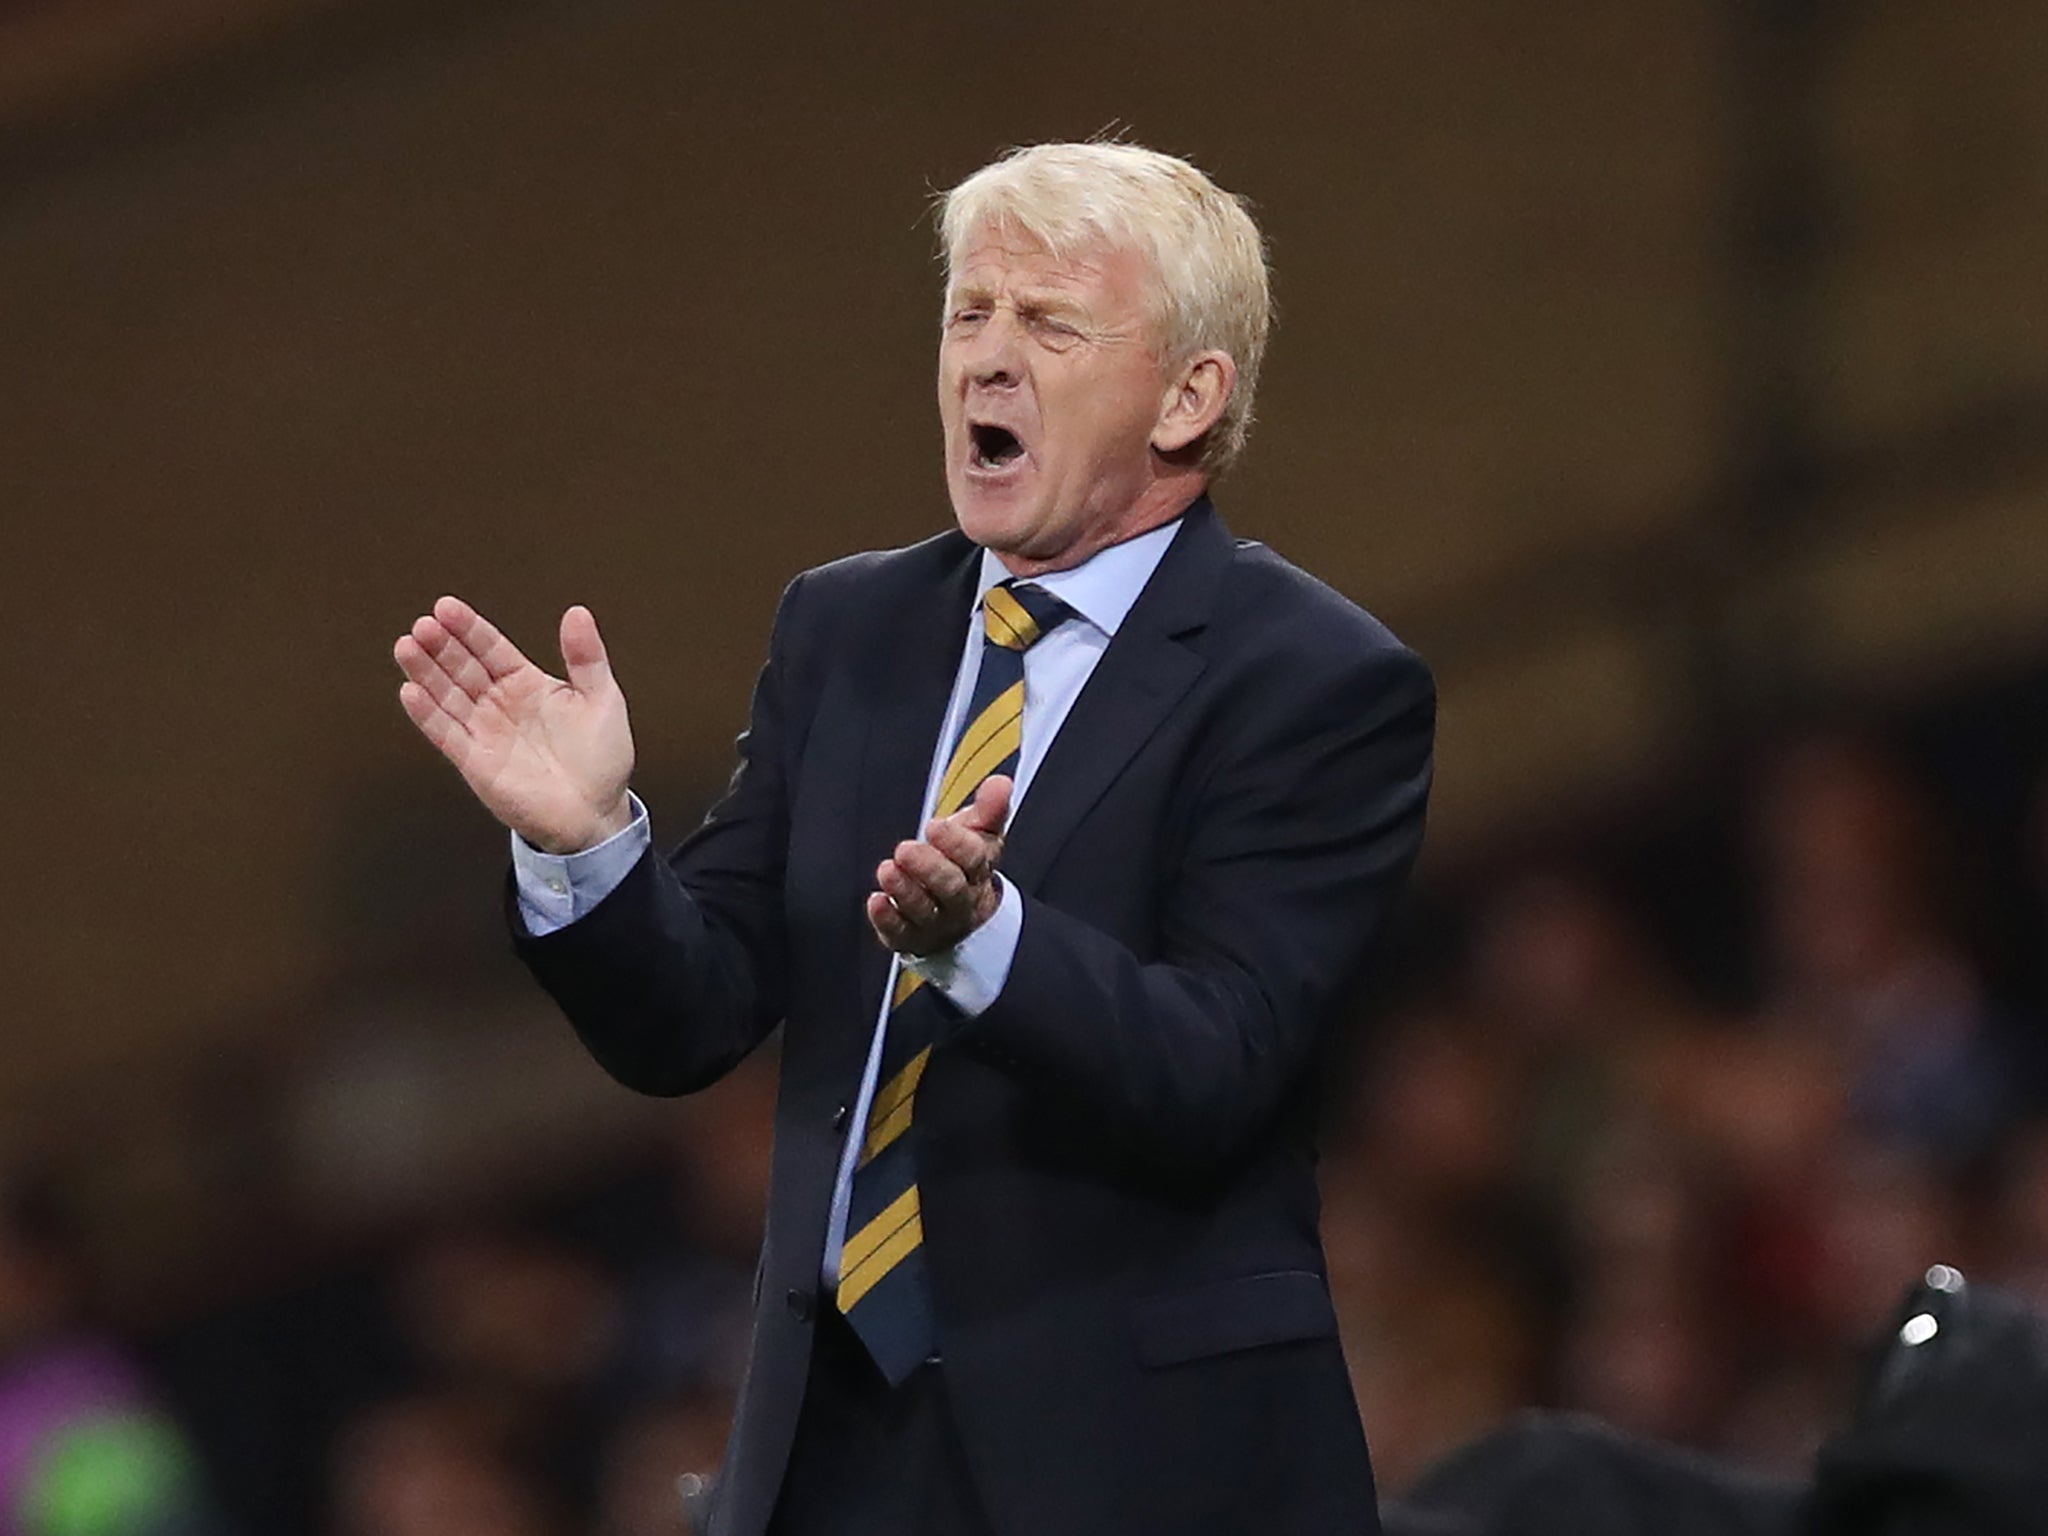 Strachan is said to be considering his position